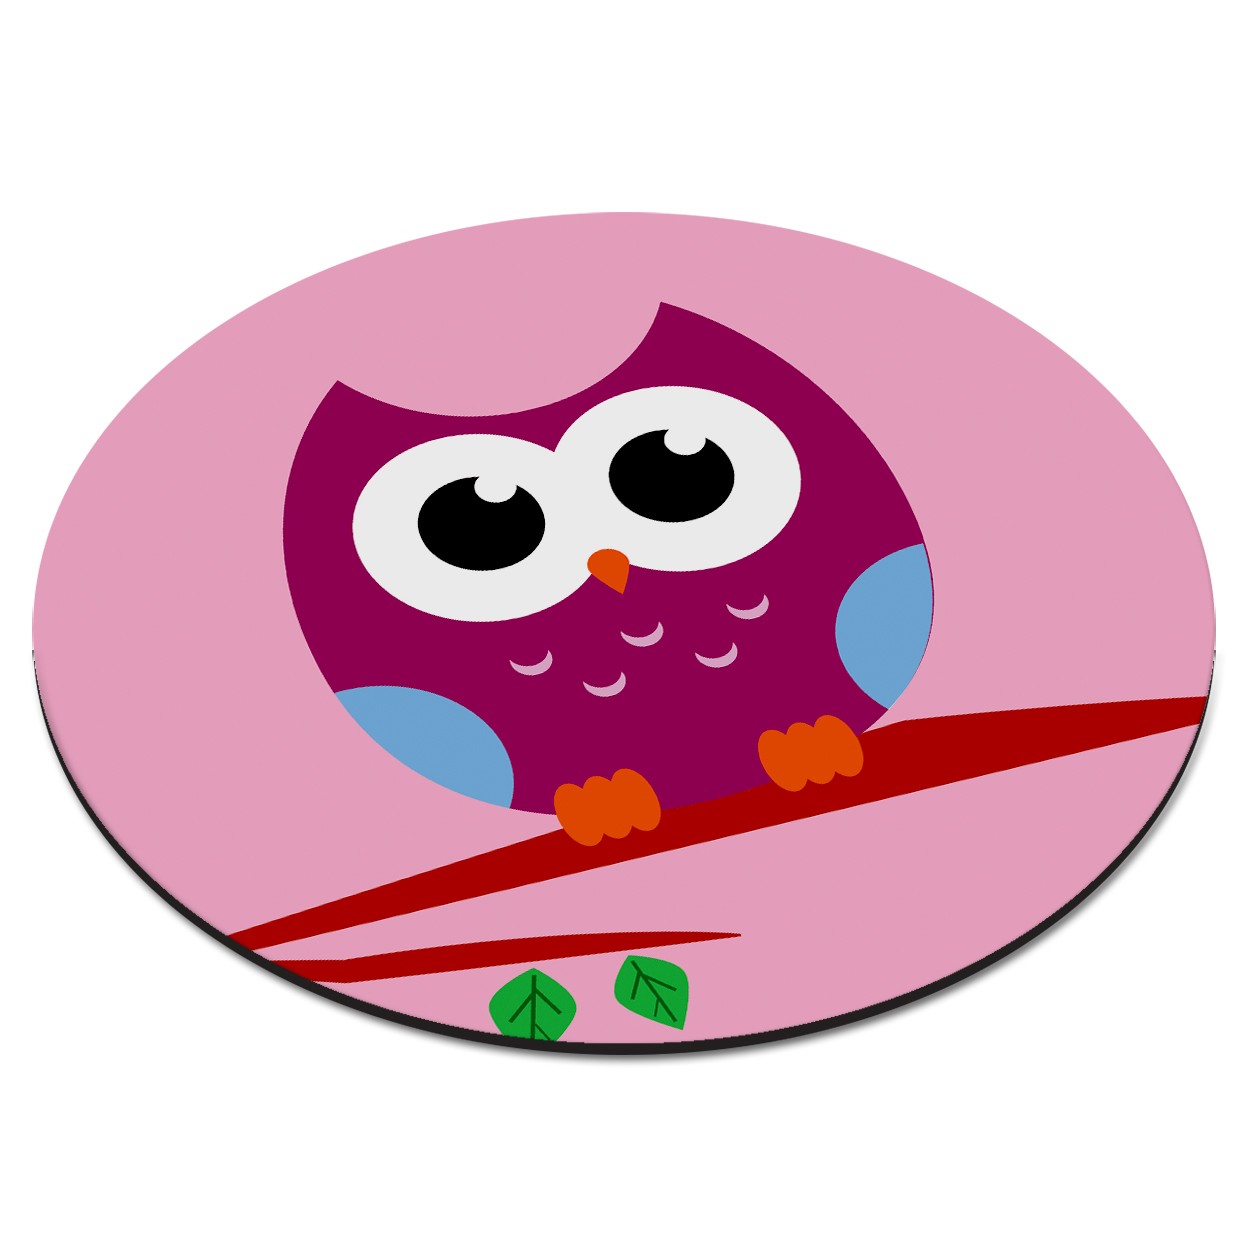 Owl In Tree Purple Circular PC Computer Mouse Mat Pad